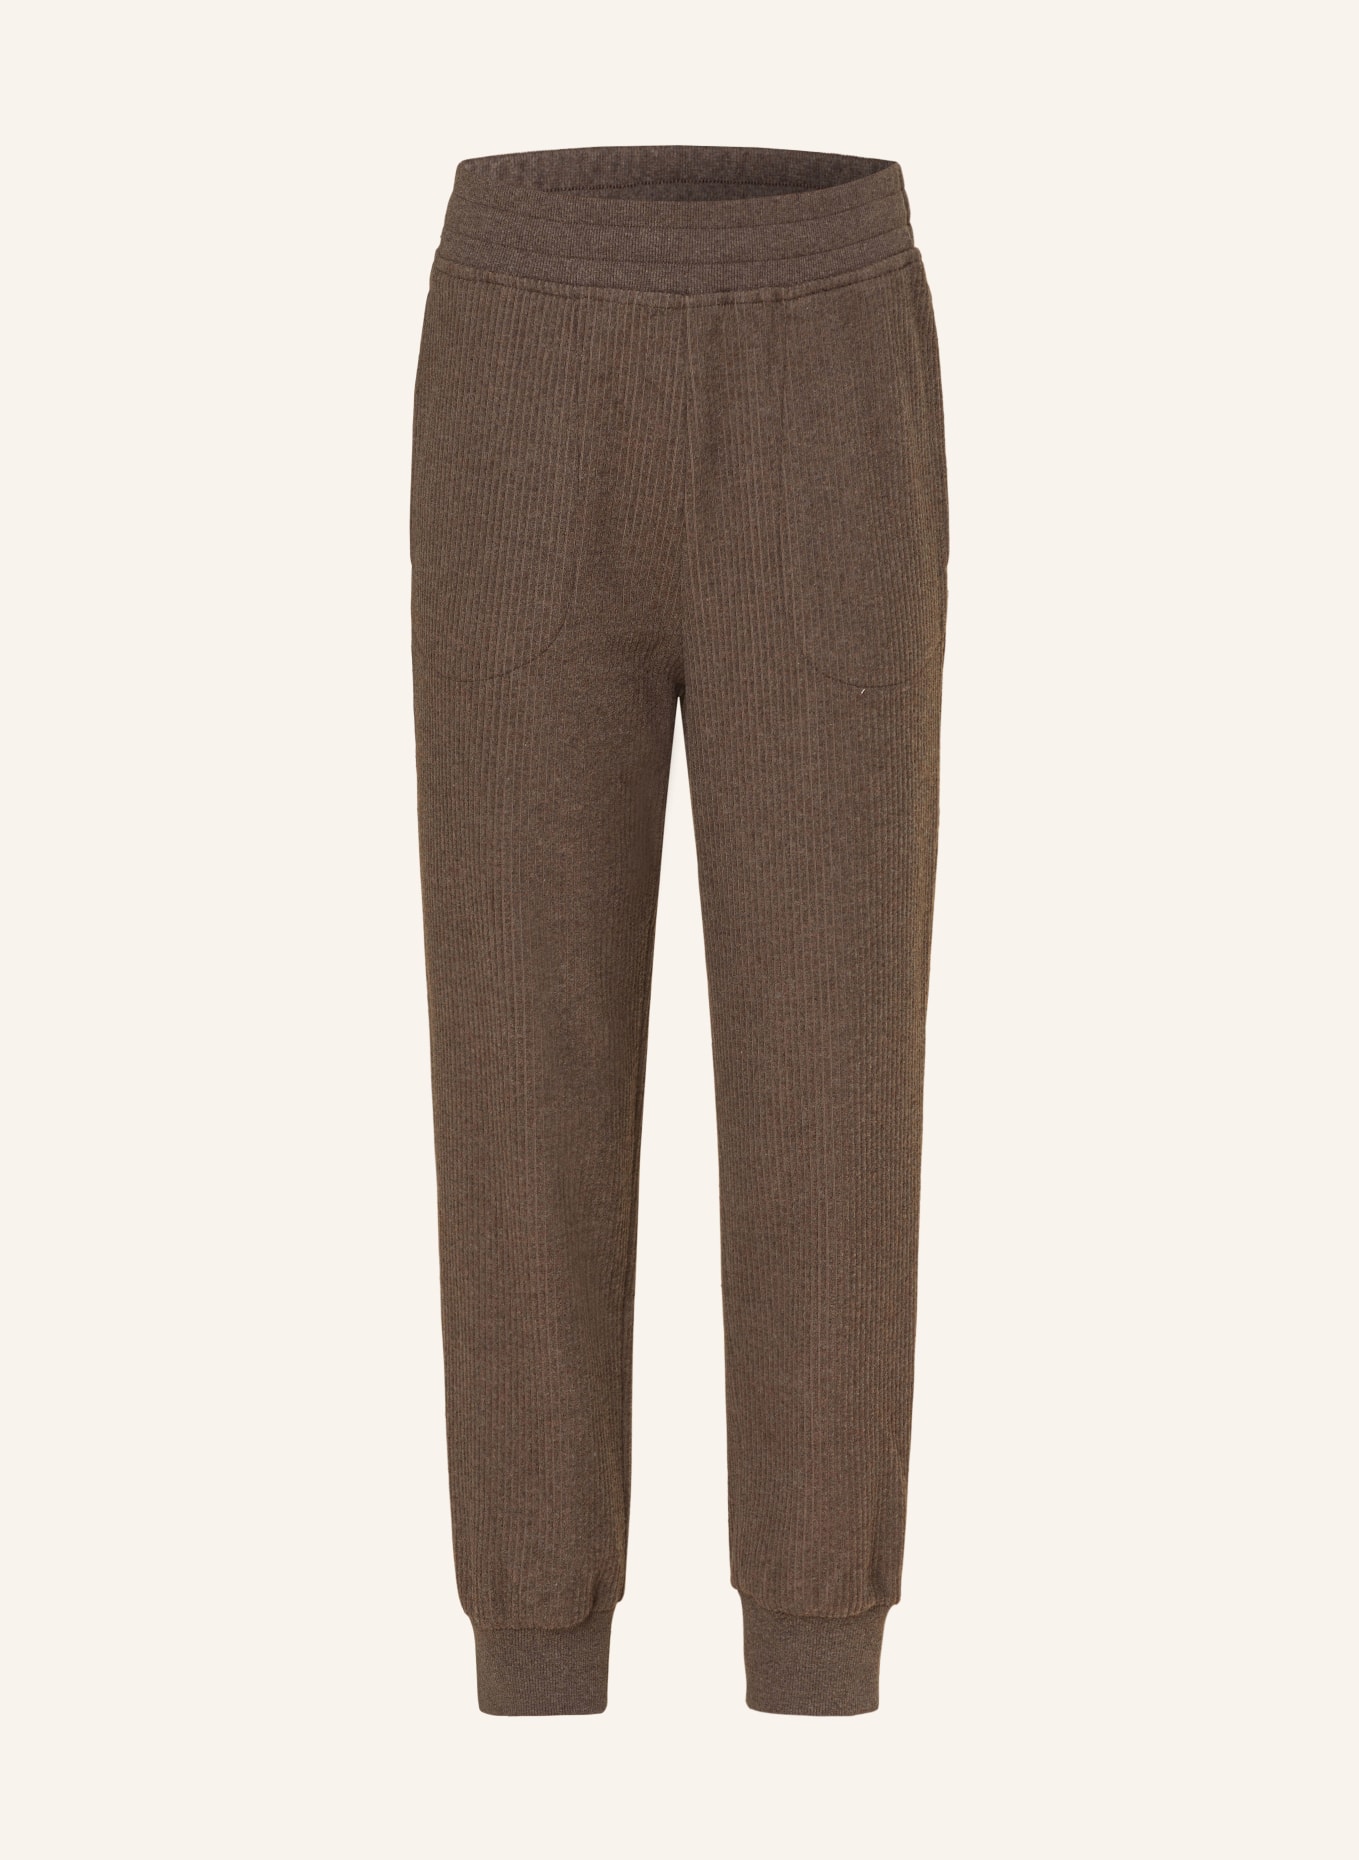 VARLEY Pants RUSSELL in jogger style, Color: BROWN (Image 1)